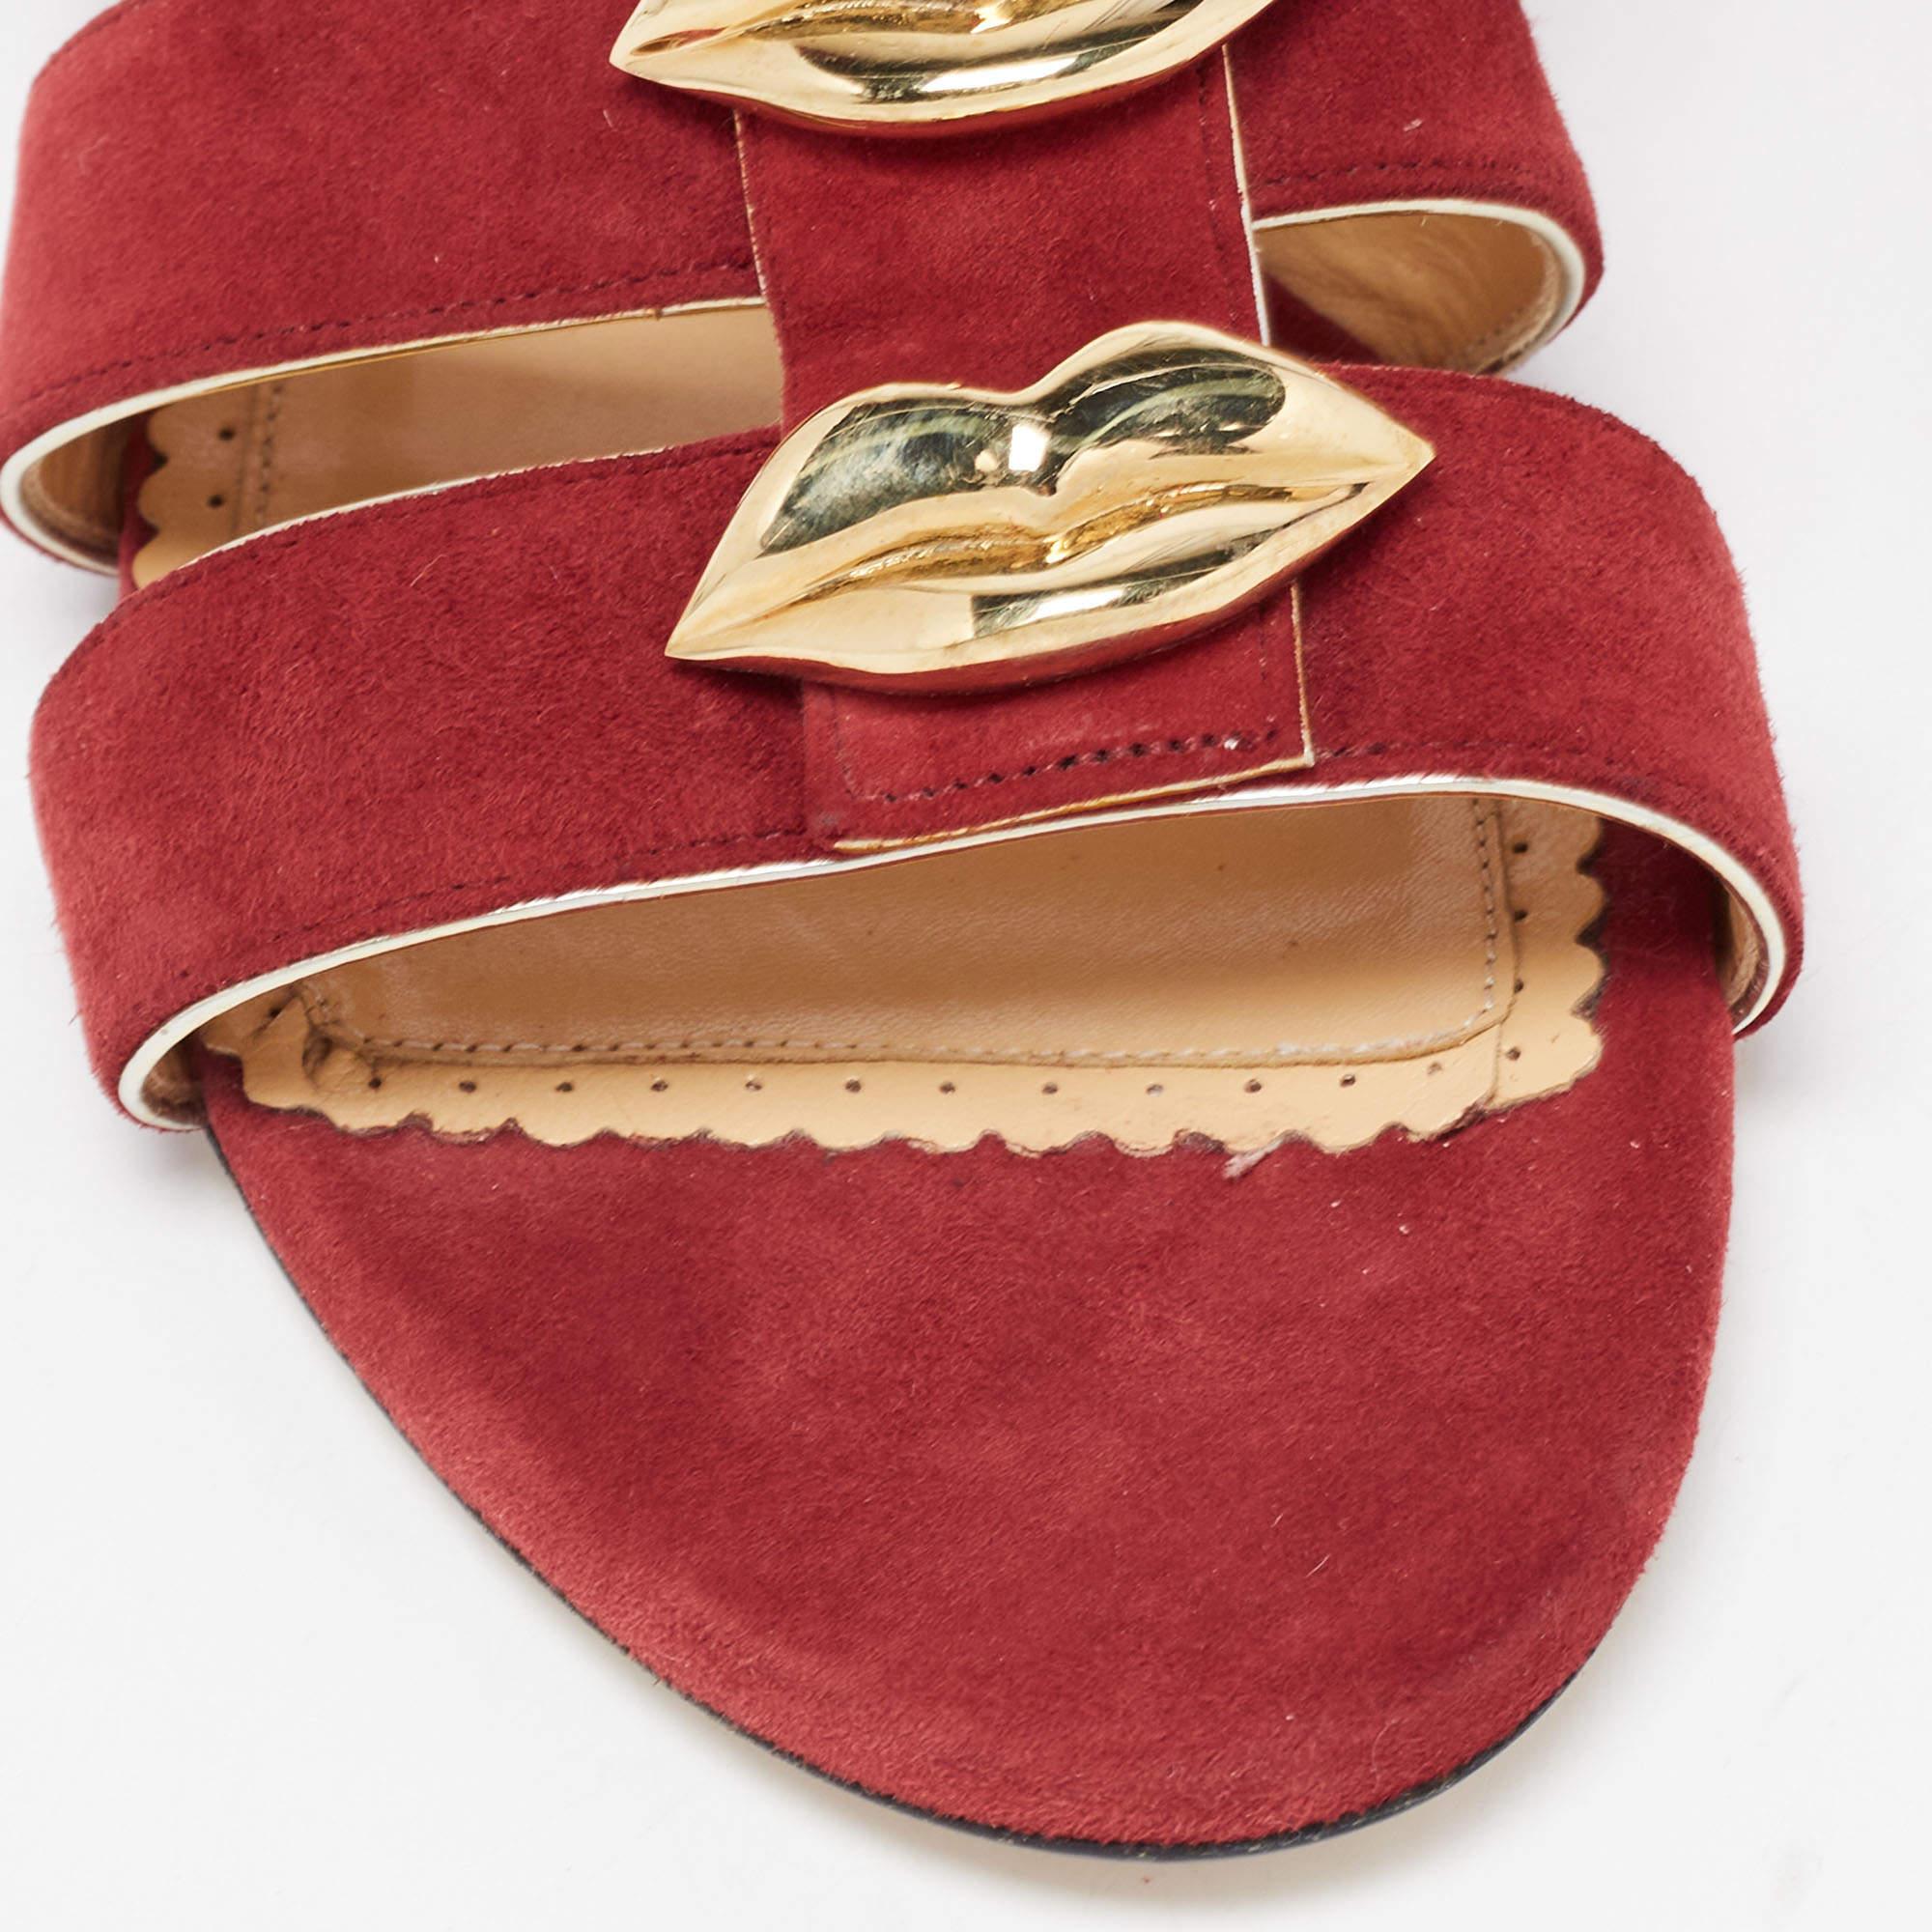 Charlotte Olympia Sandales plates « One More Kiss » en daim rouge grenat taille 36 2